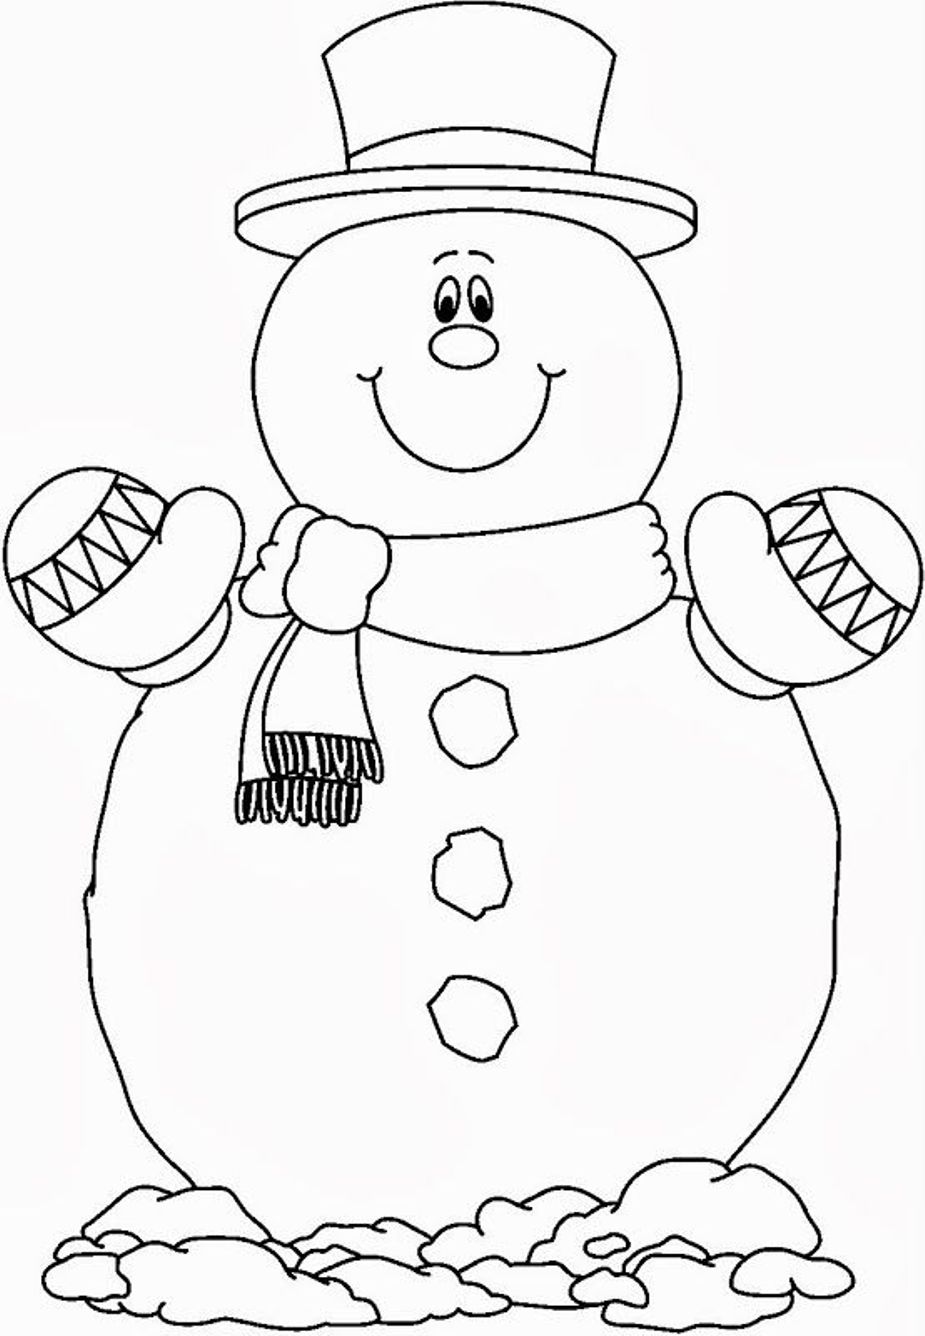 Smilling Snowman S Free0757 Coloring Page